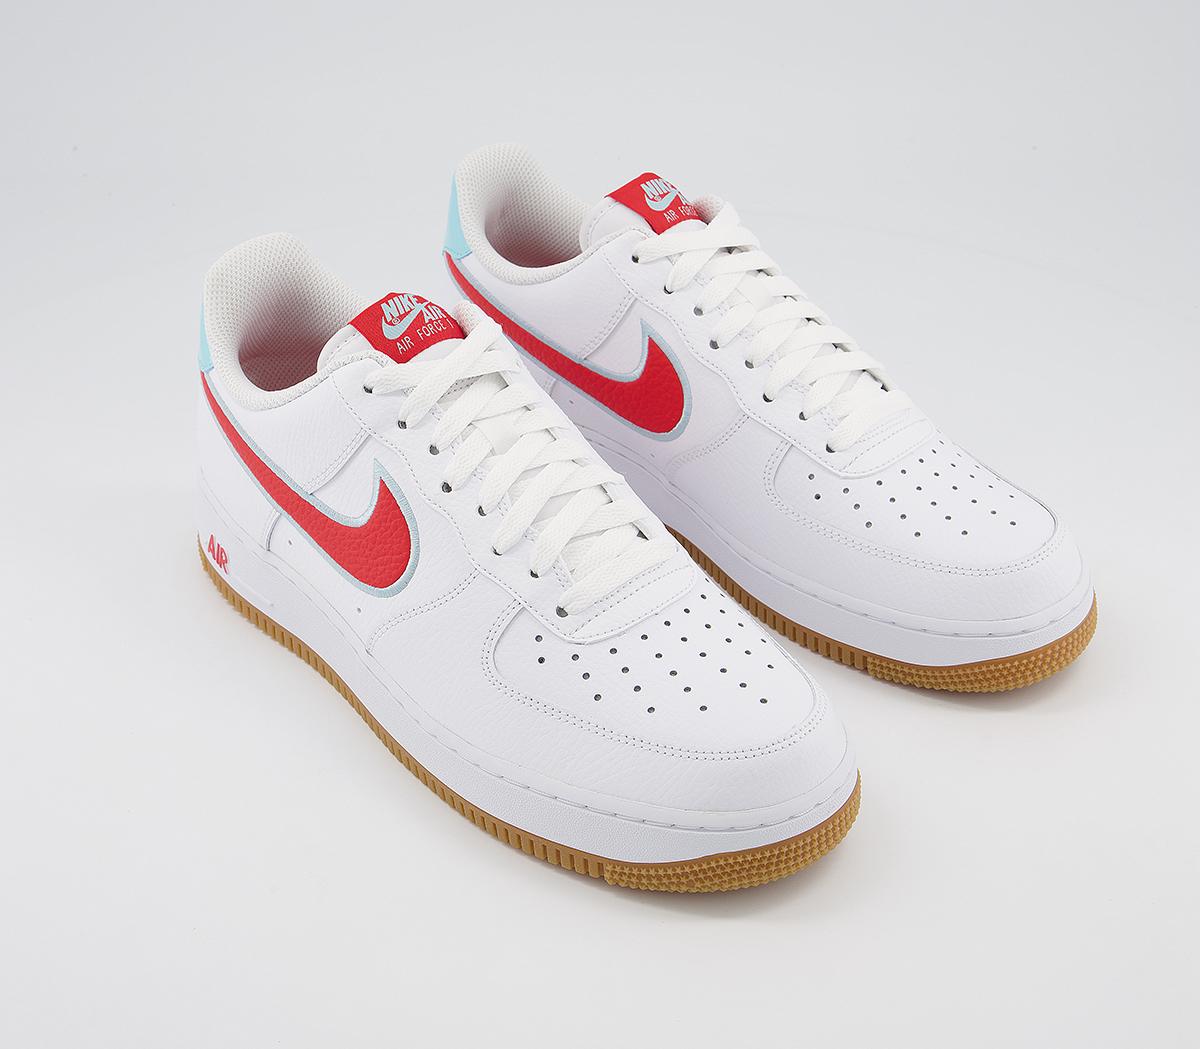 Nike Air Force 1 07 Trainers White Chile Red Glacier Ice - His trainers